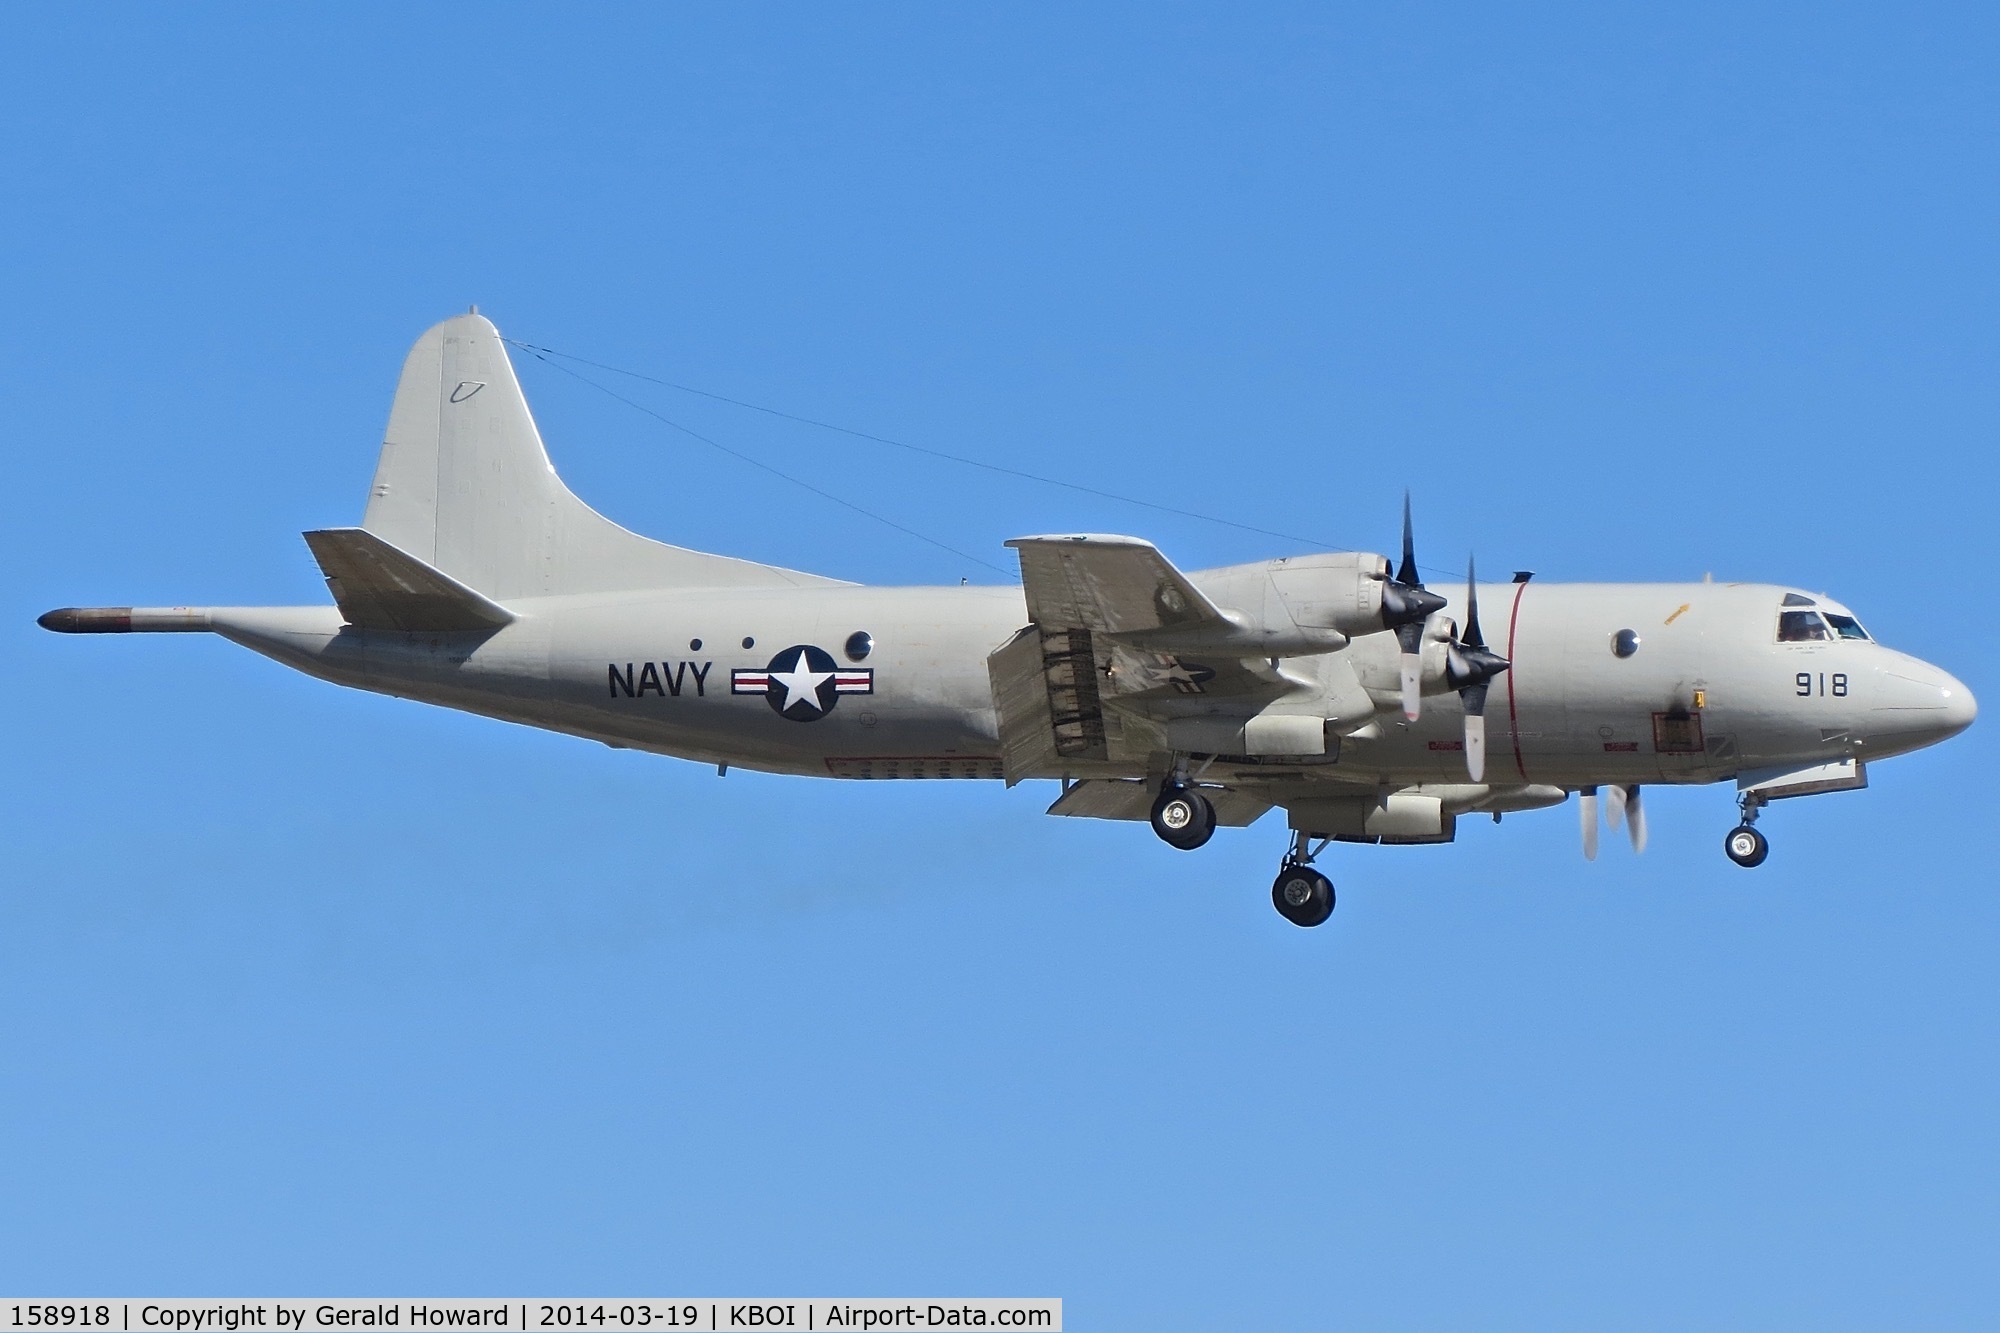 158918, Lockheed P-3C Orion C/N 285A-5590, Low approach to RWY 10R.